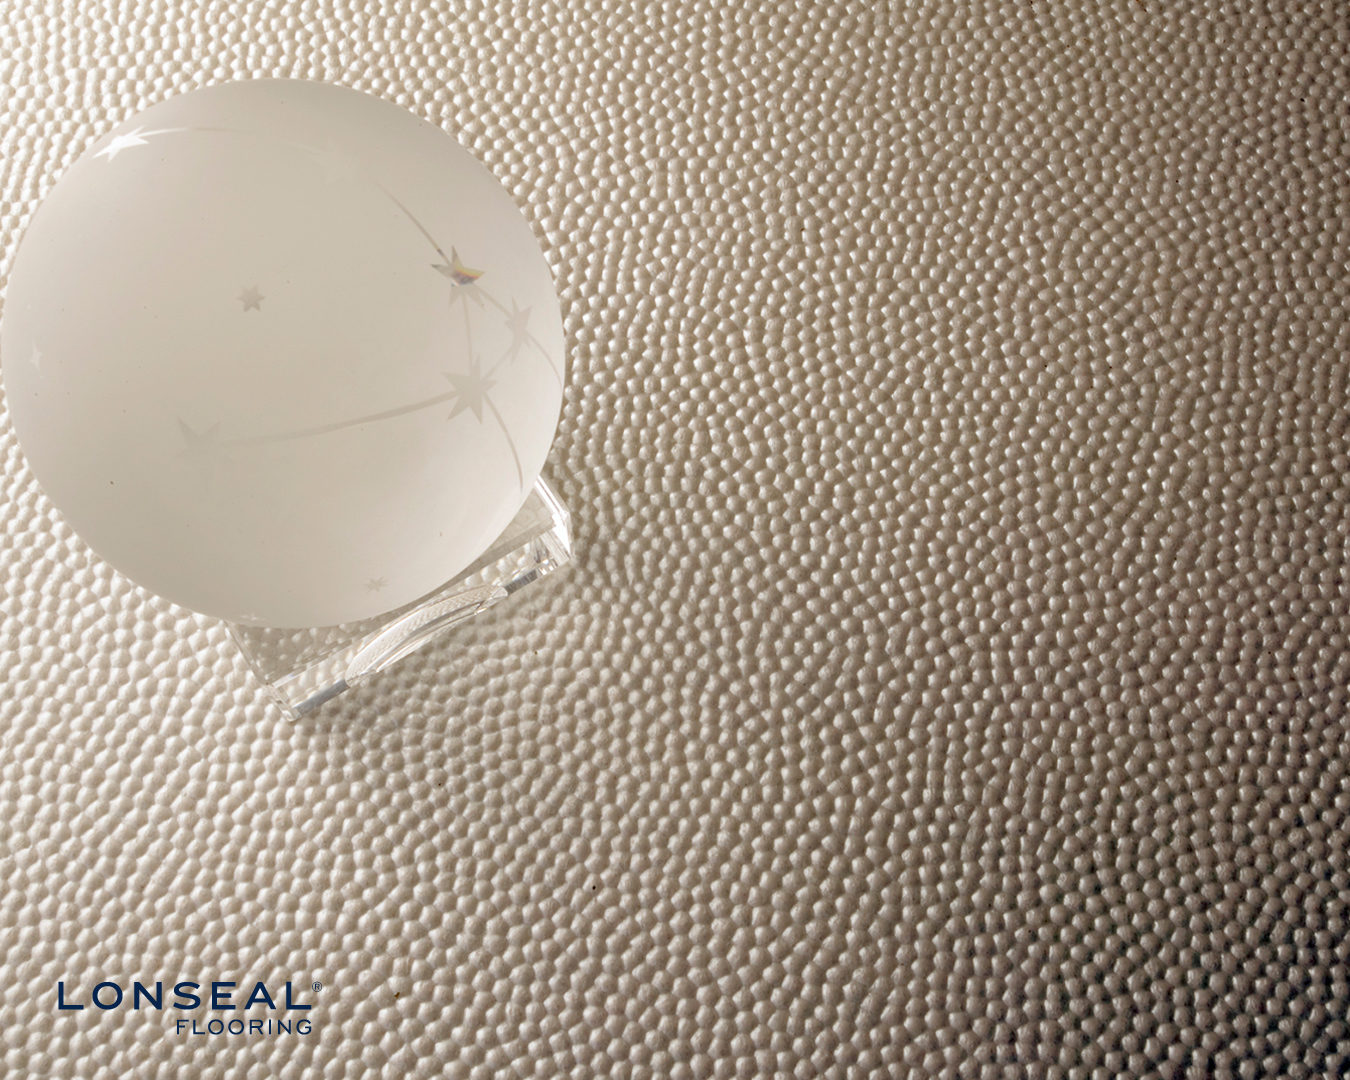 Lonseal, Sheet Vinyl Flooring, LONBEAD, is a luxuriously textured surface consisting of small embossed, pearl-like drops that